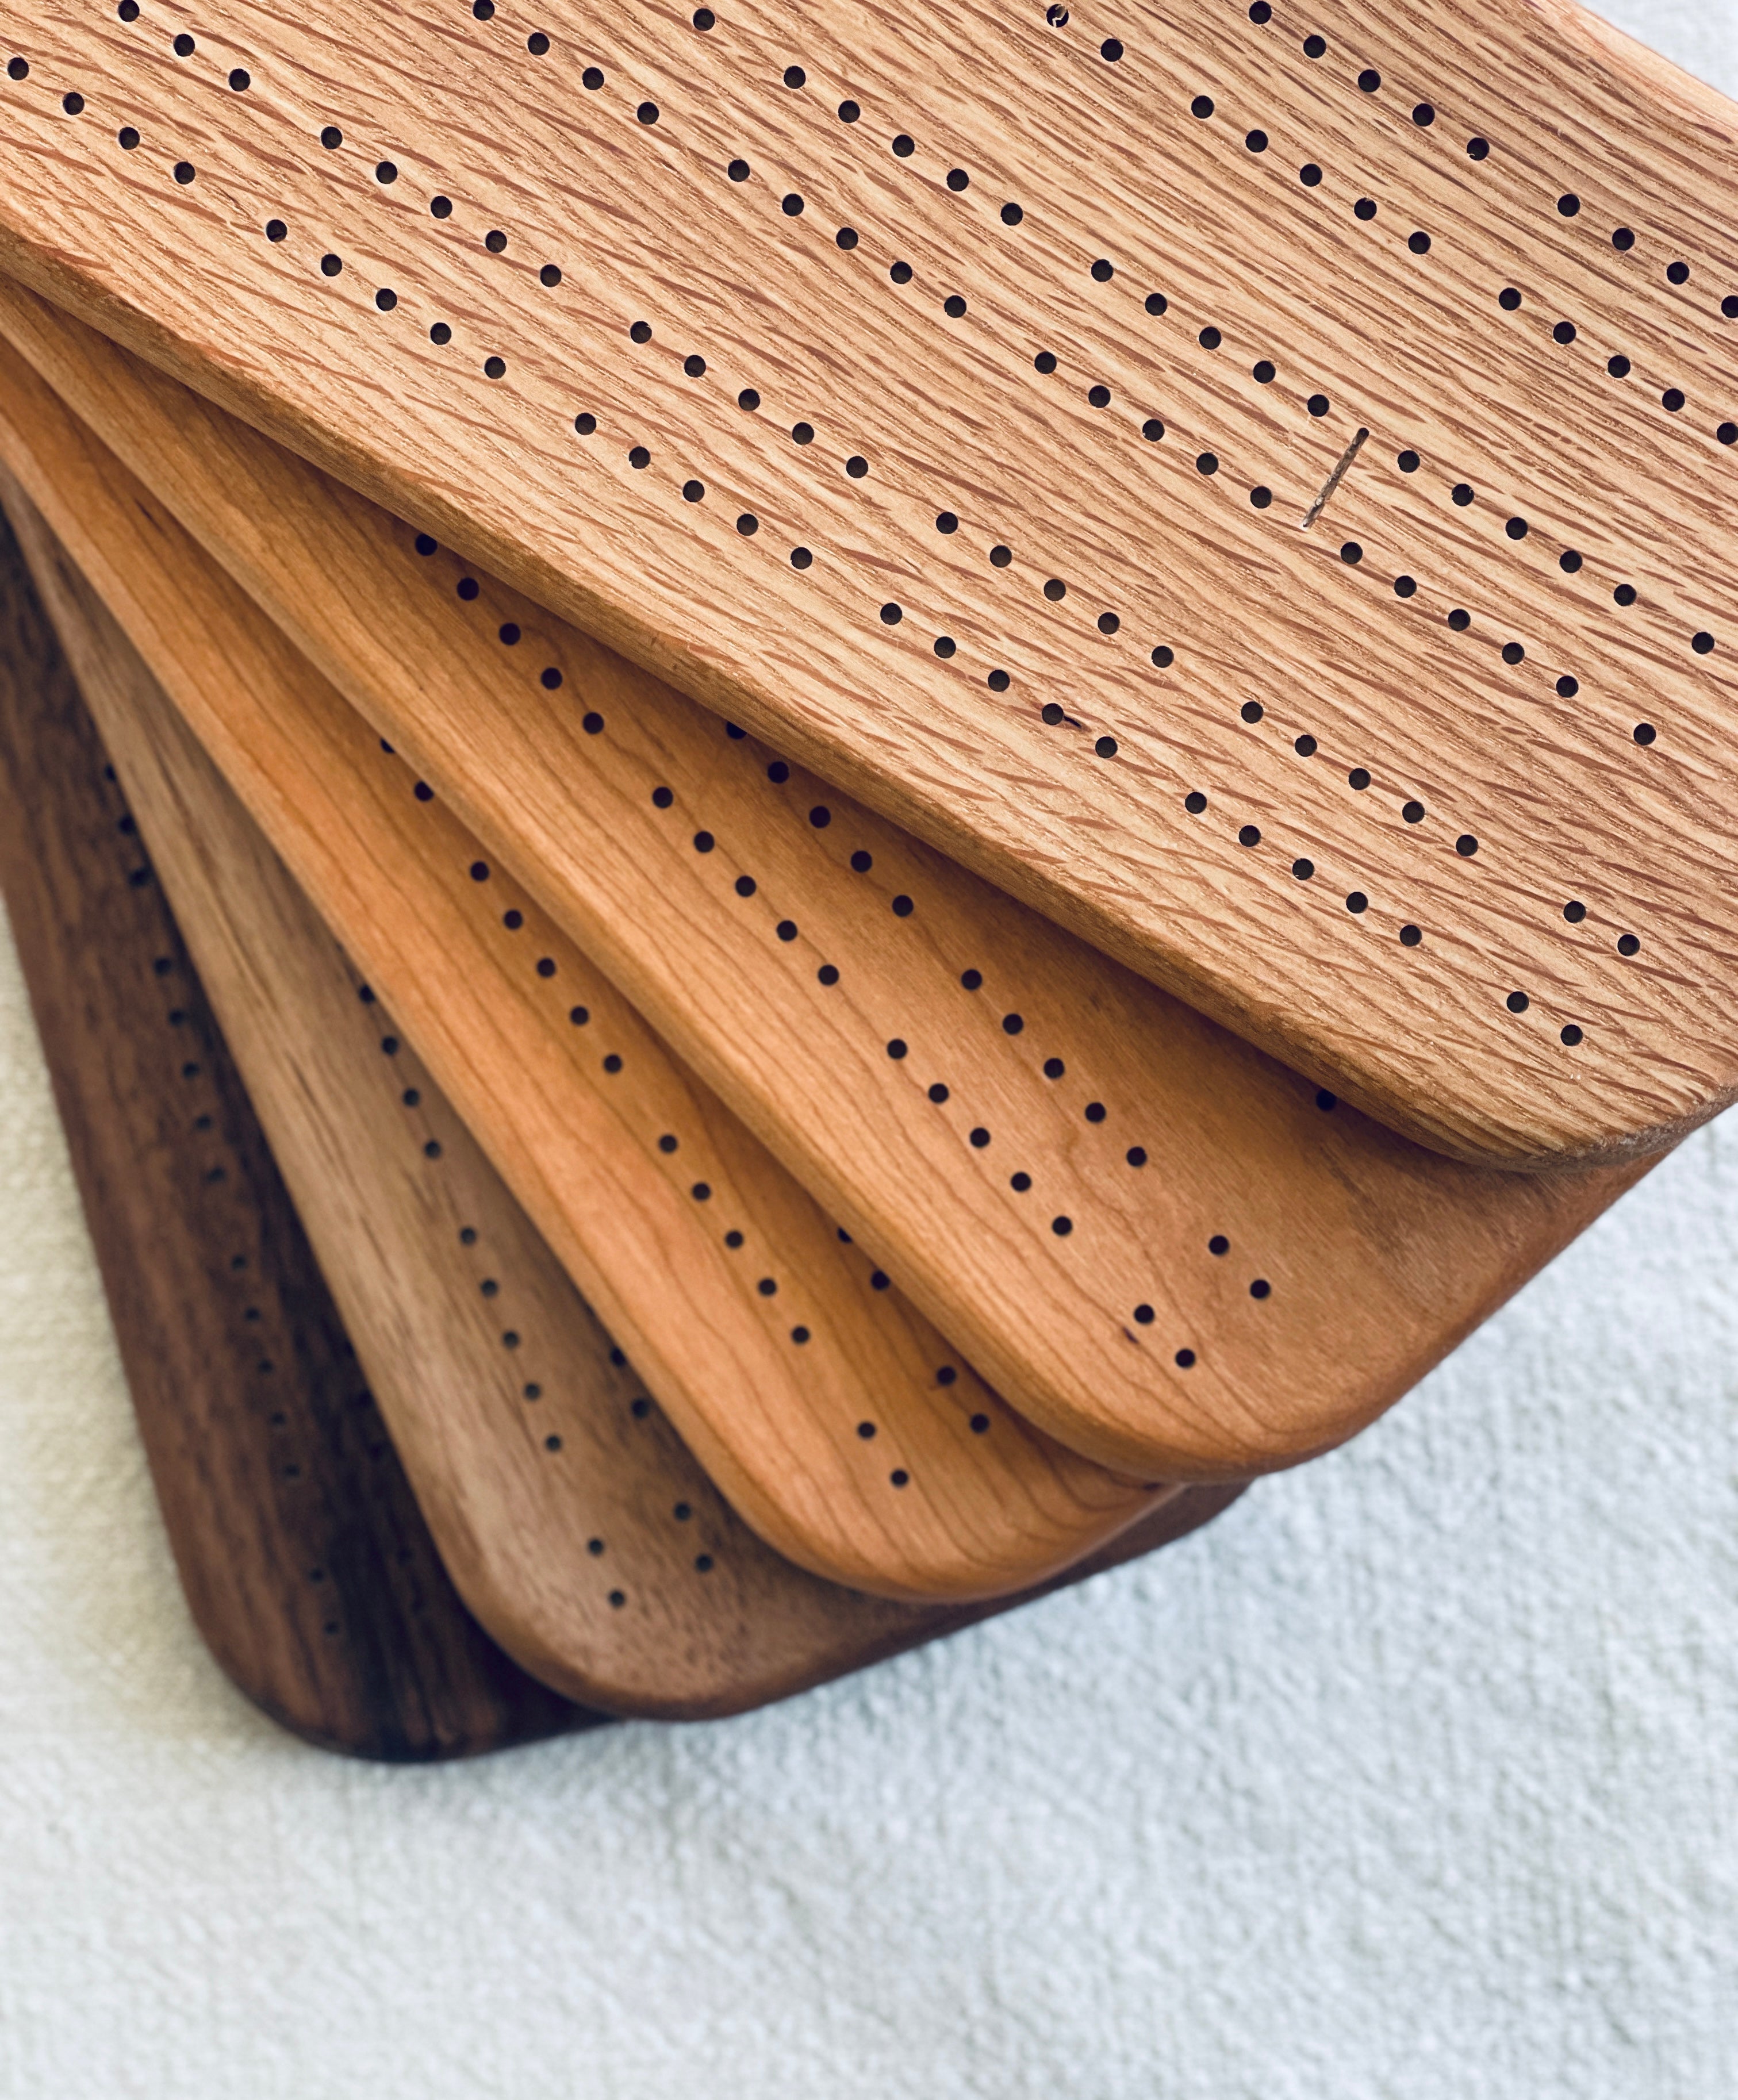 Stack of wooden cribbage boards made from walnut, cherry, and white oak.